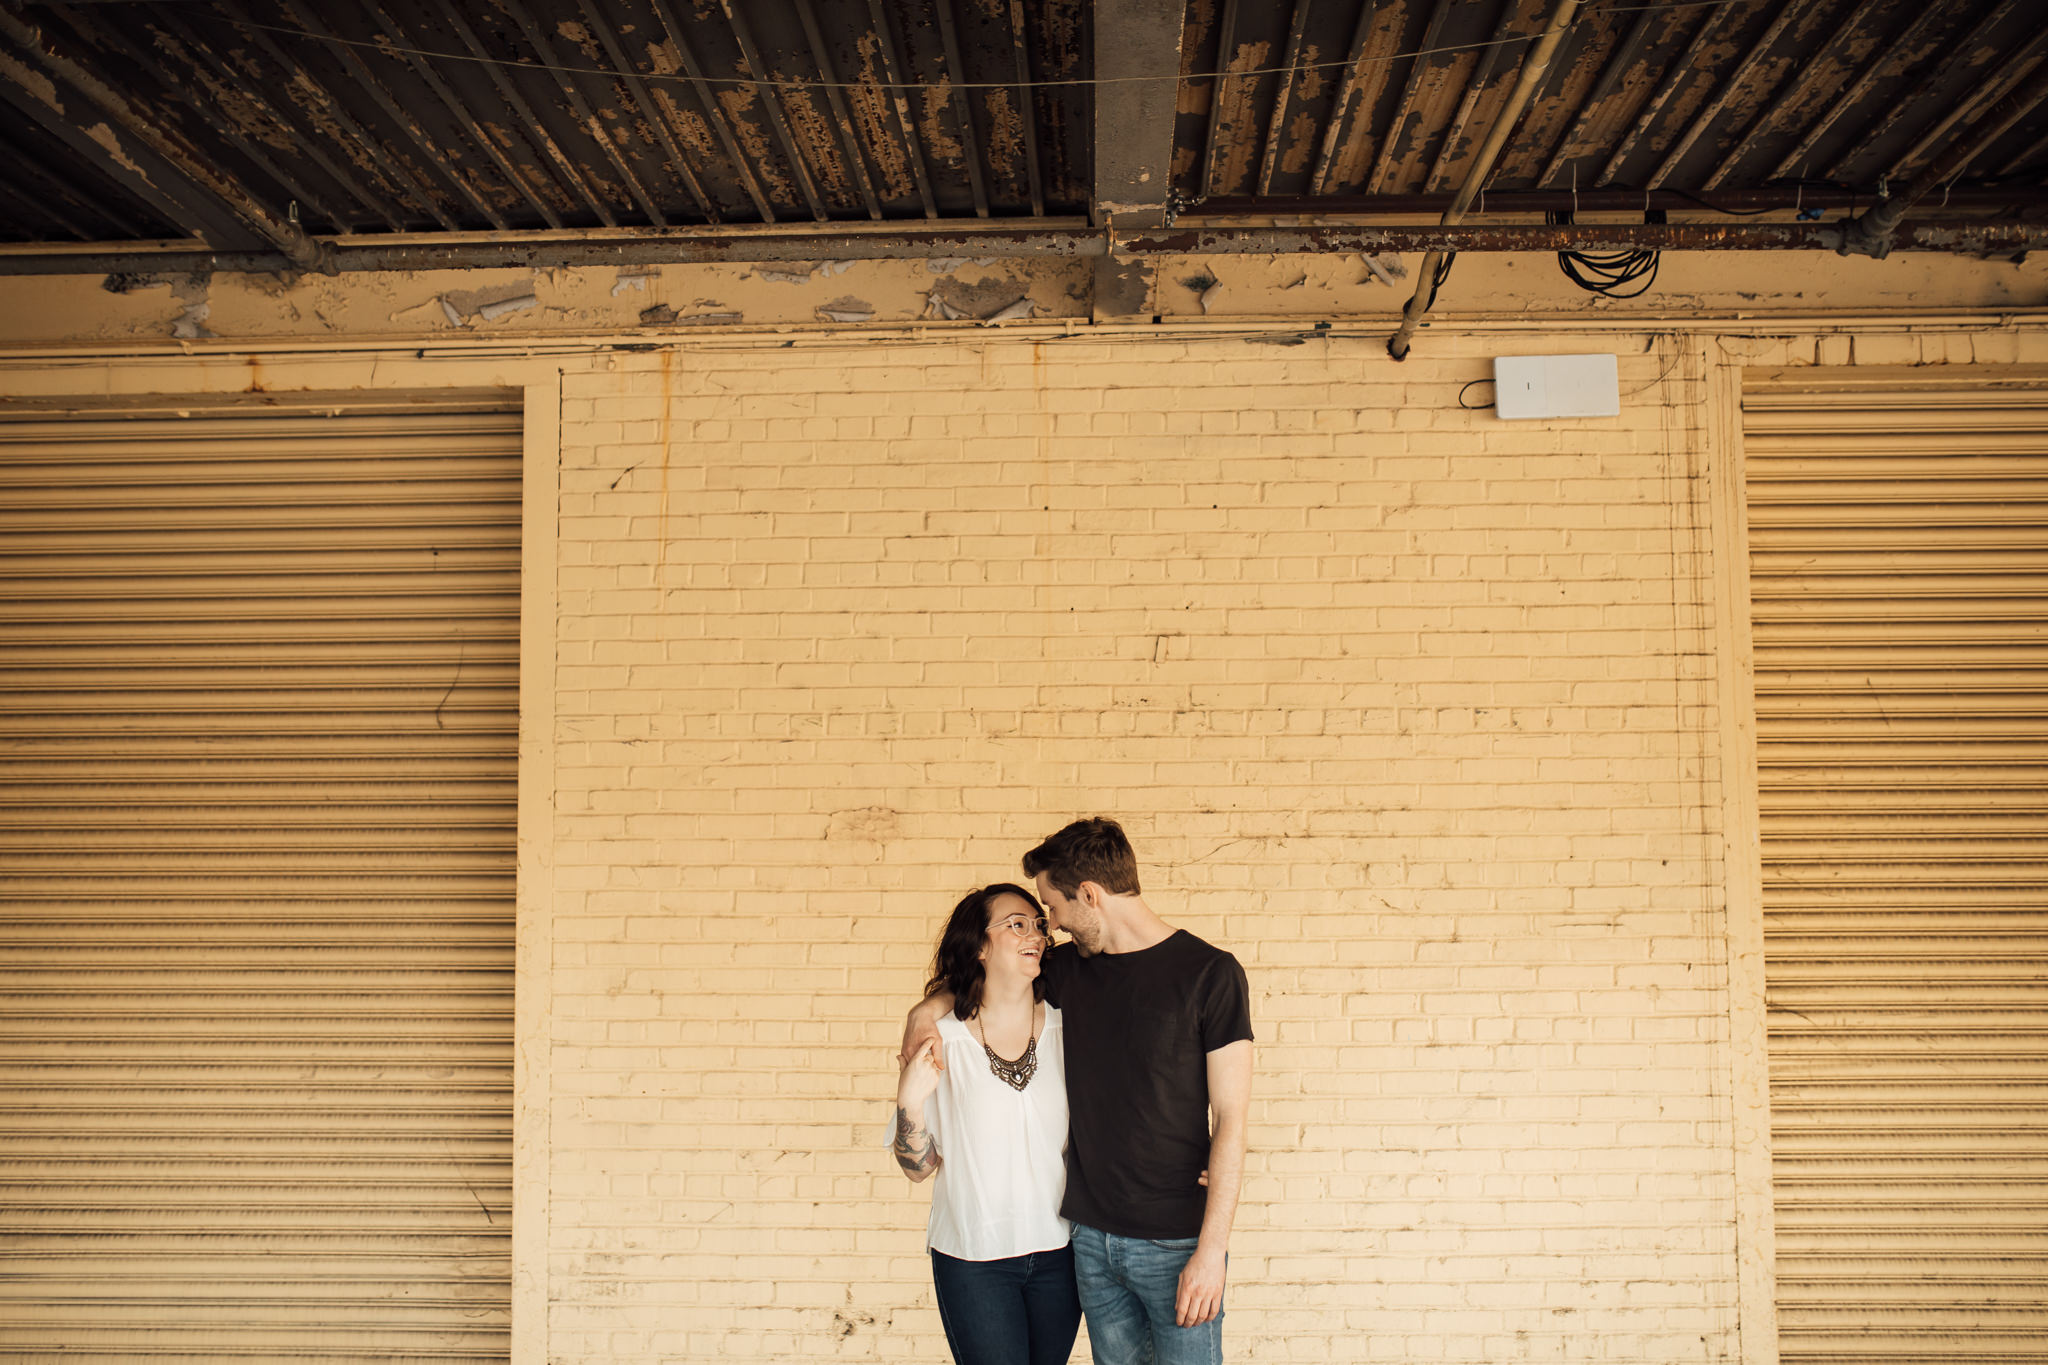 memphis-wedding-photographer-the-warmth-around-you-unique-colorful-engagement-pictures (69 of 80).jpg